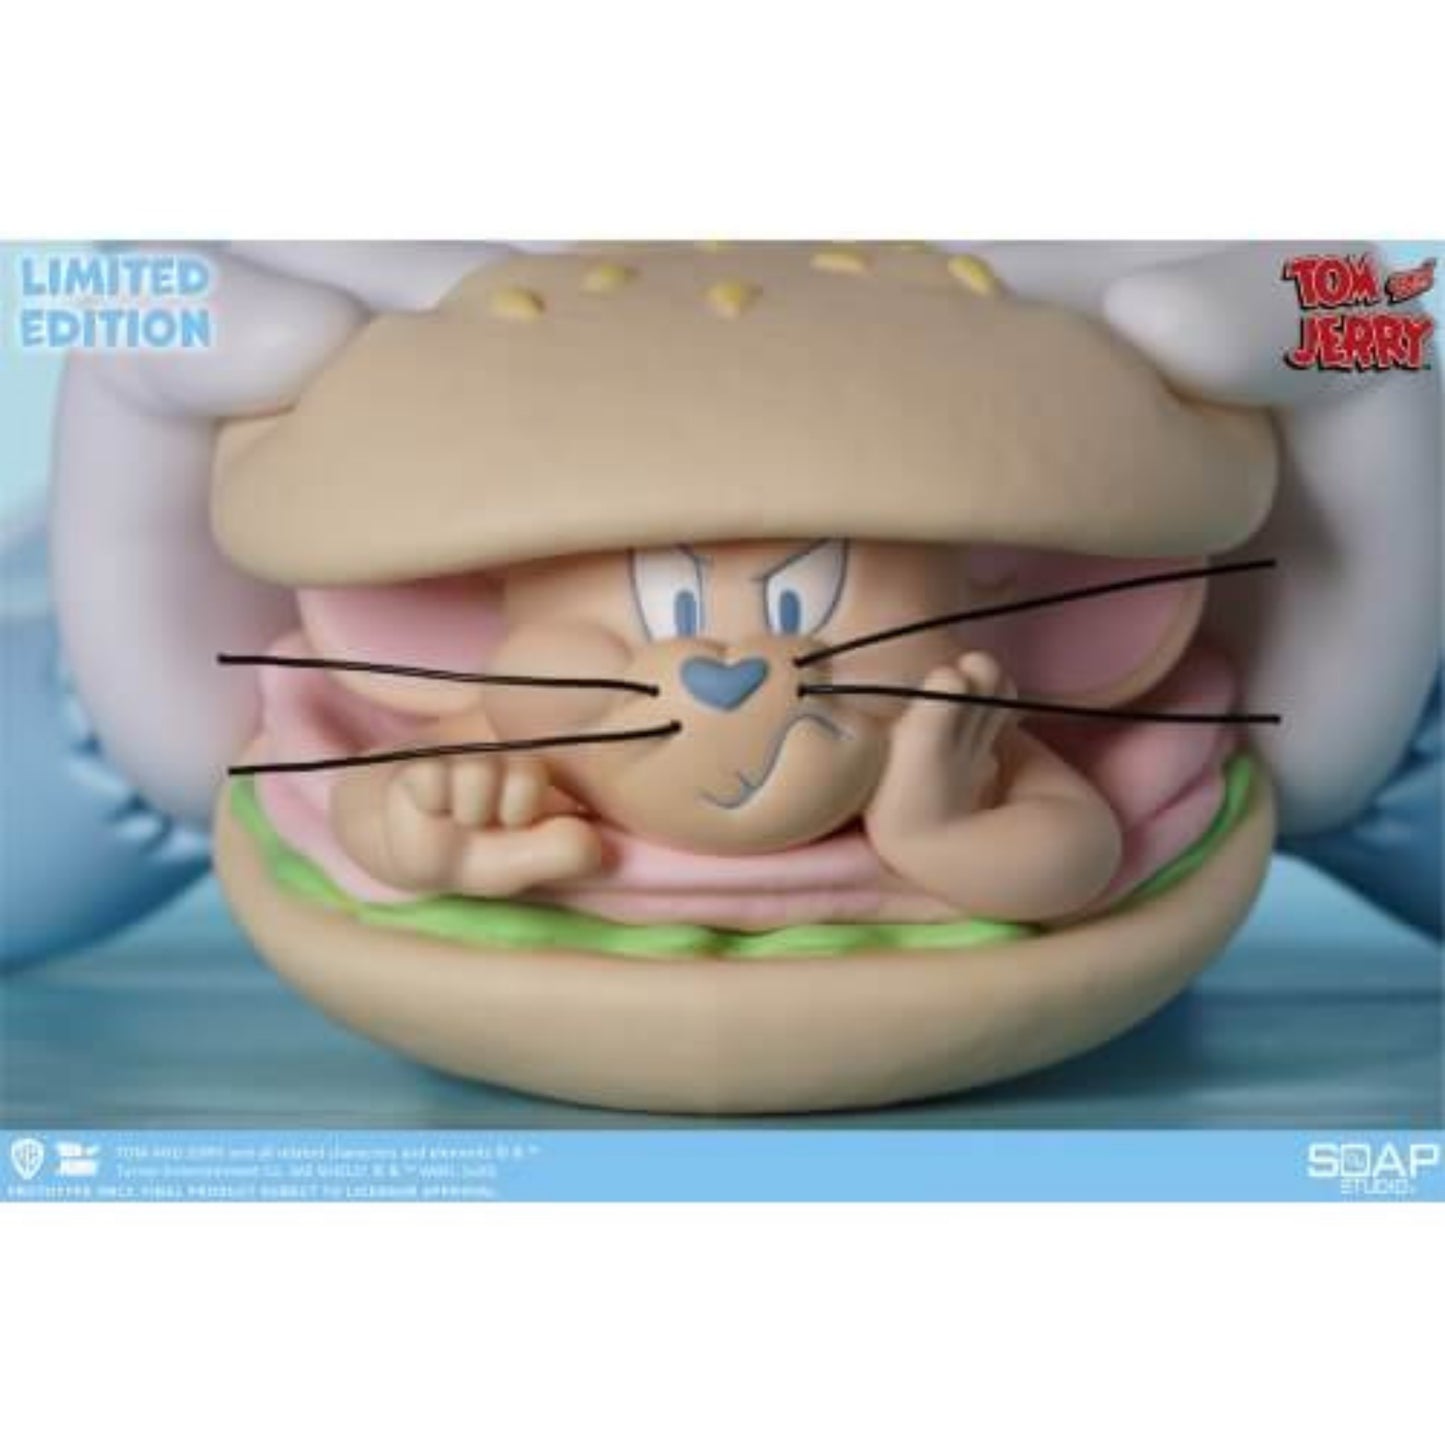 Tom and Jerry Burger Vinyl Bust - Lagoon Blue Version - Limited Edition - Art Toy, Blue Version, Busts, Exclusive, Jerry's Burger, New Arrivals, soap studios, tom and jerry, tom&jerry - Gadgetz Home